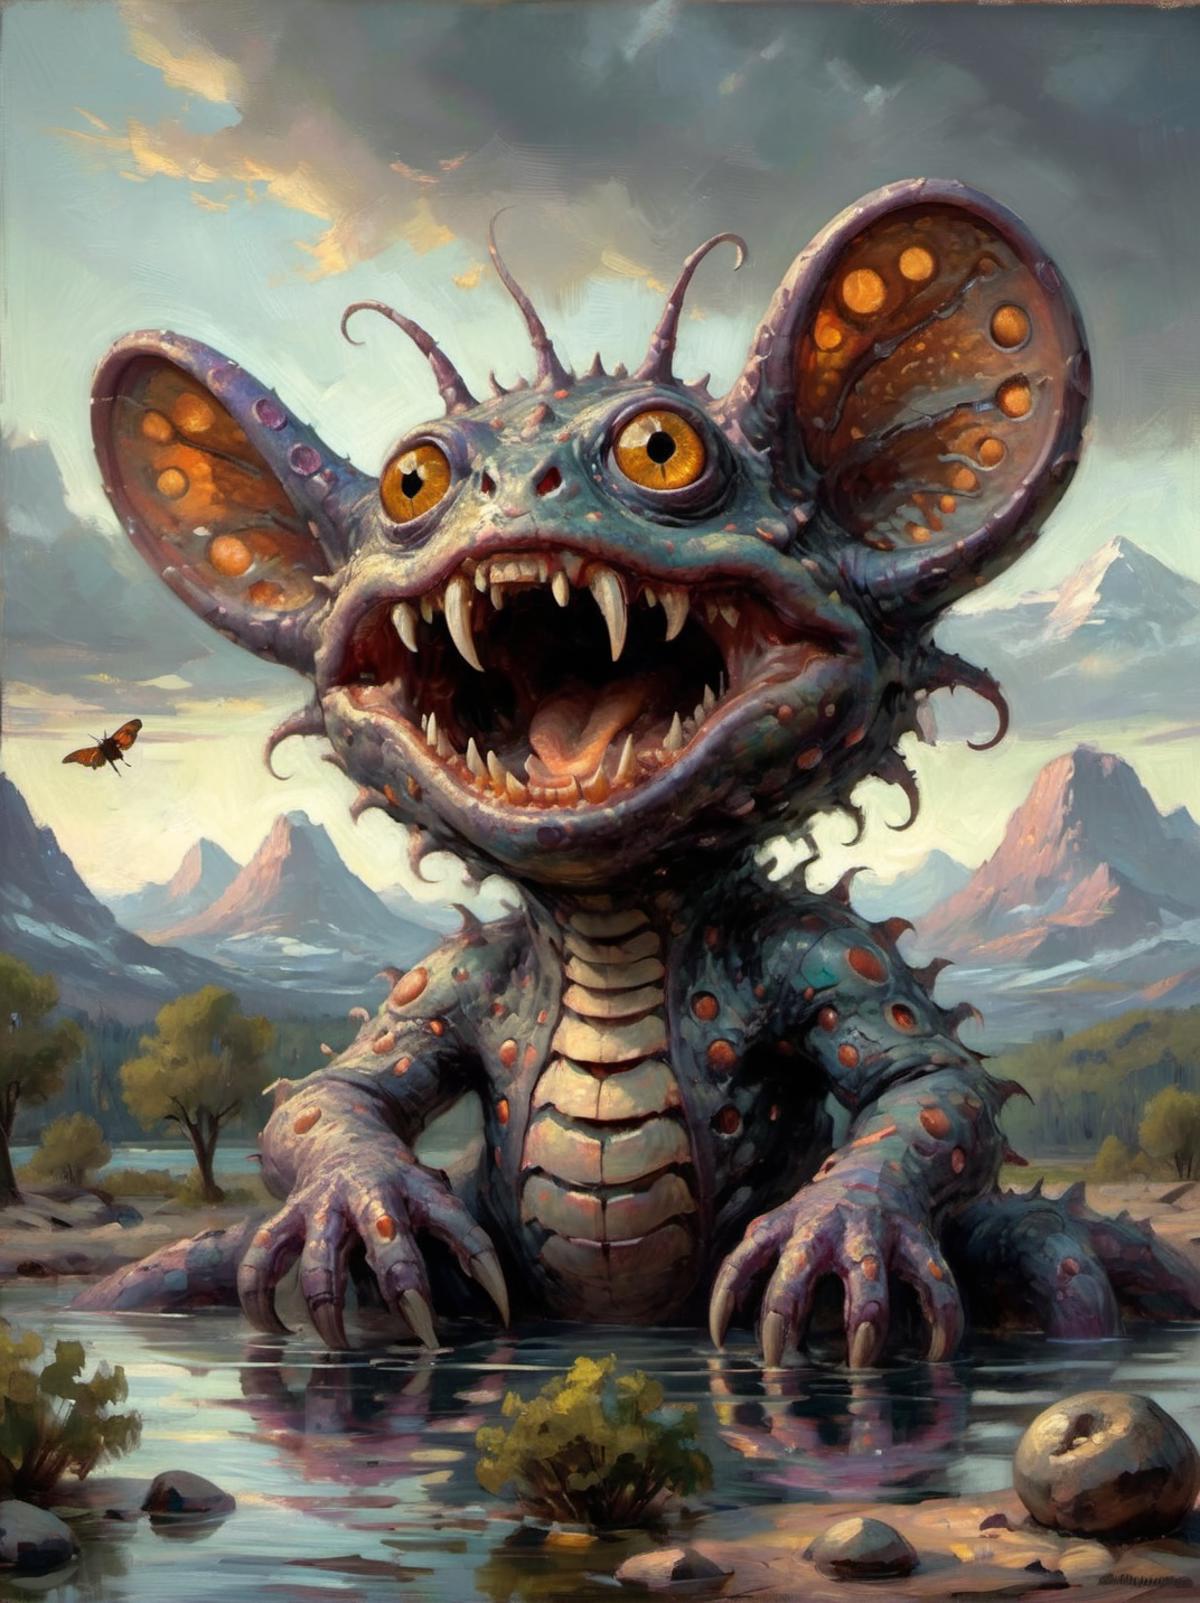 A painting of a monster with big teeth, sitting in a lake.